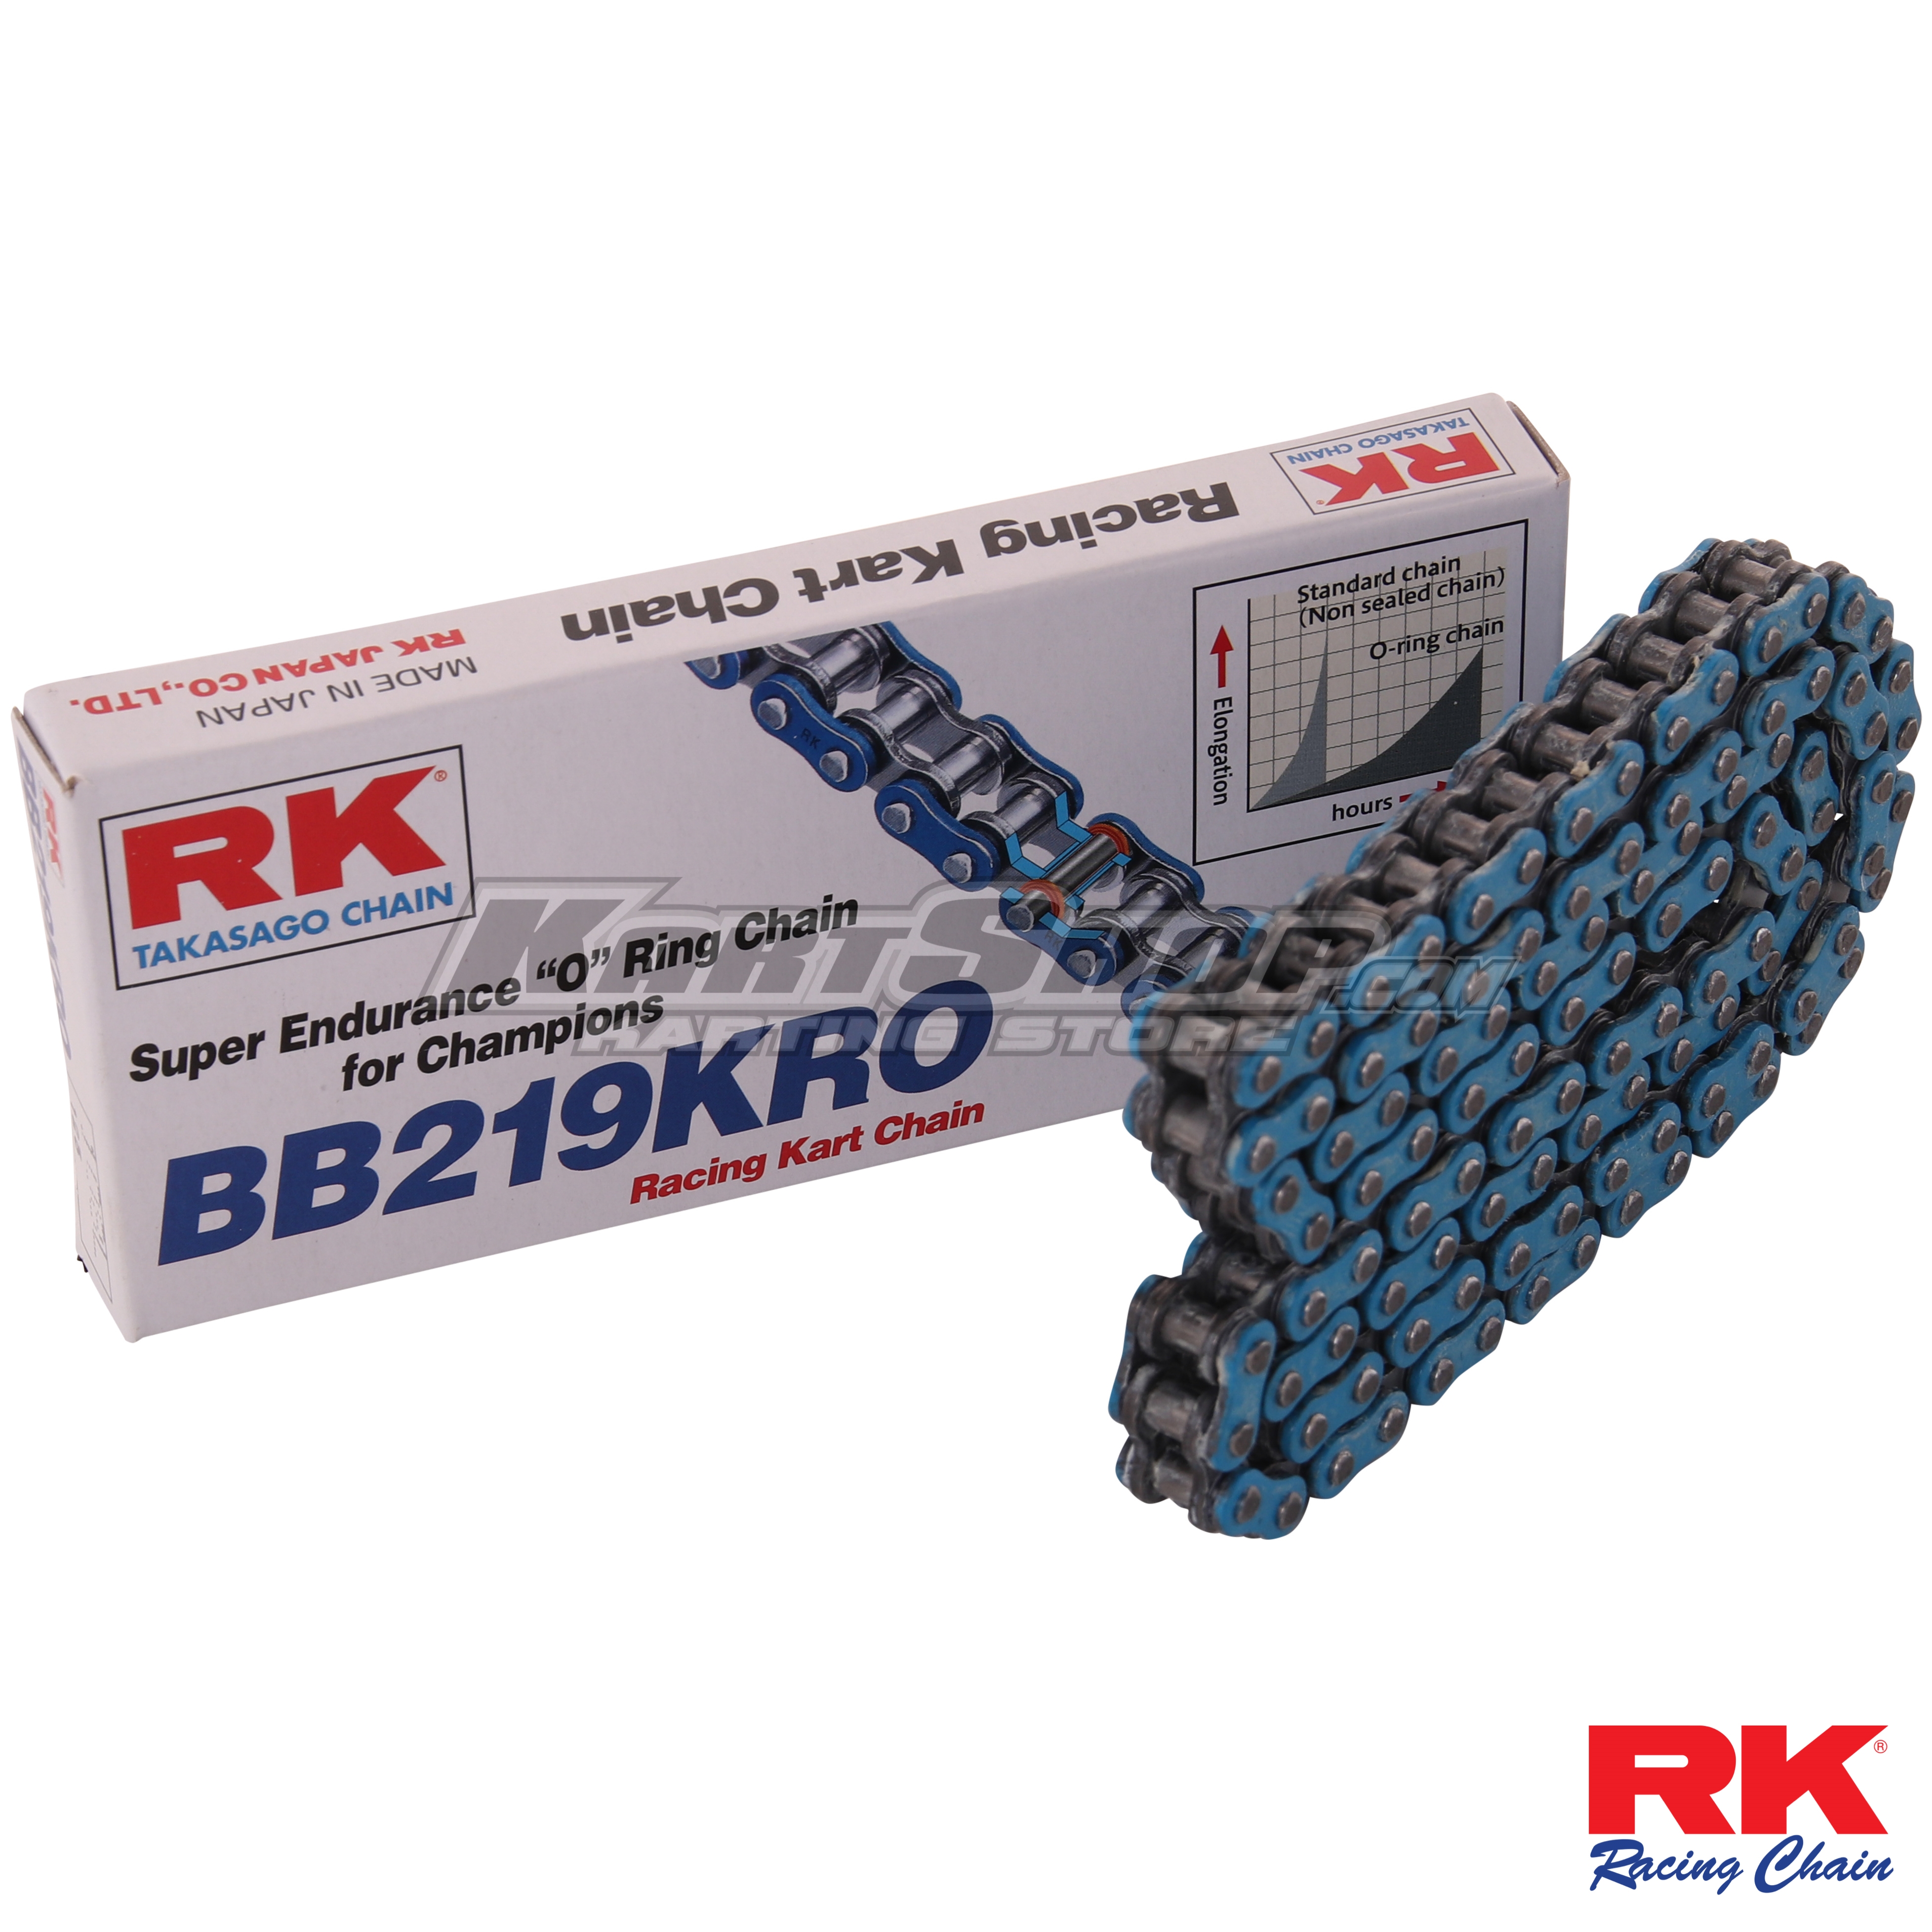 O-ring racing chain from RK with 116 links